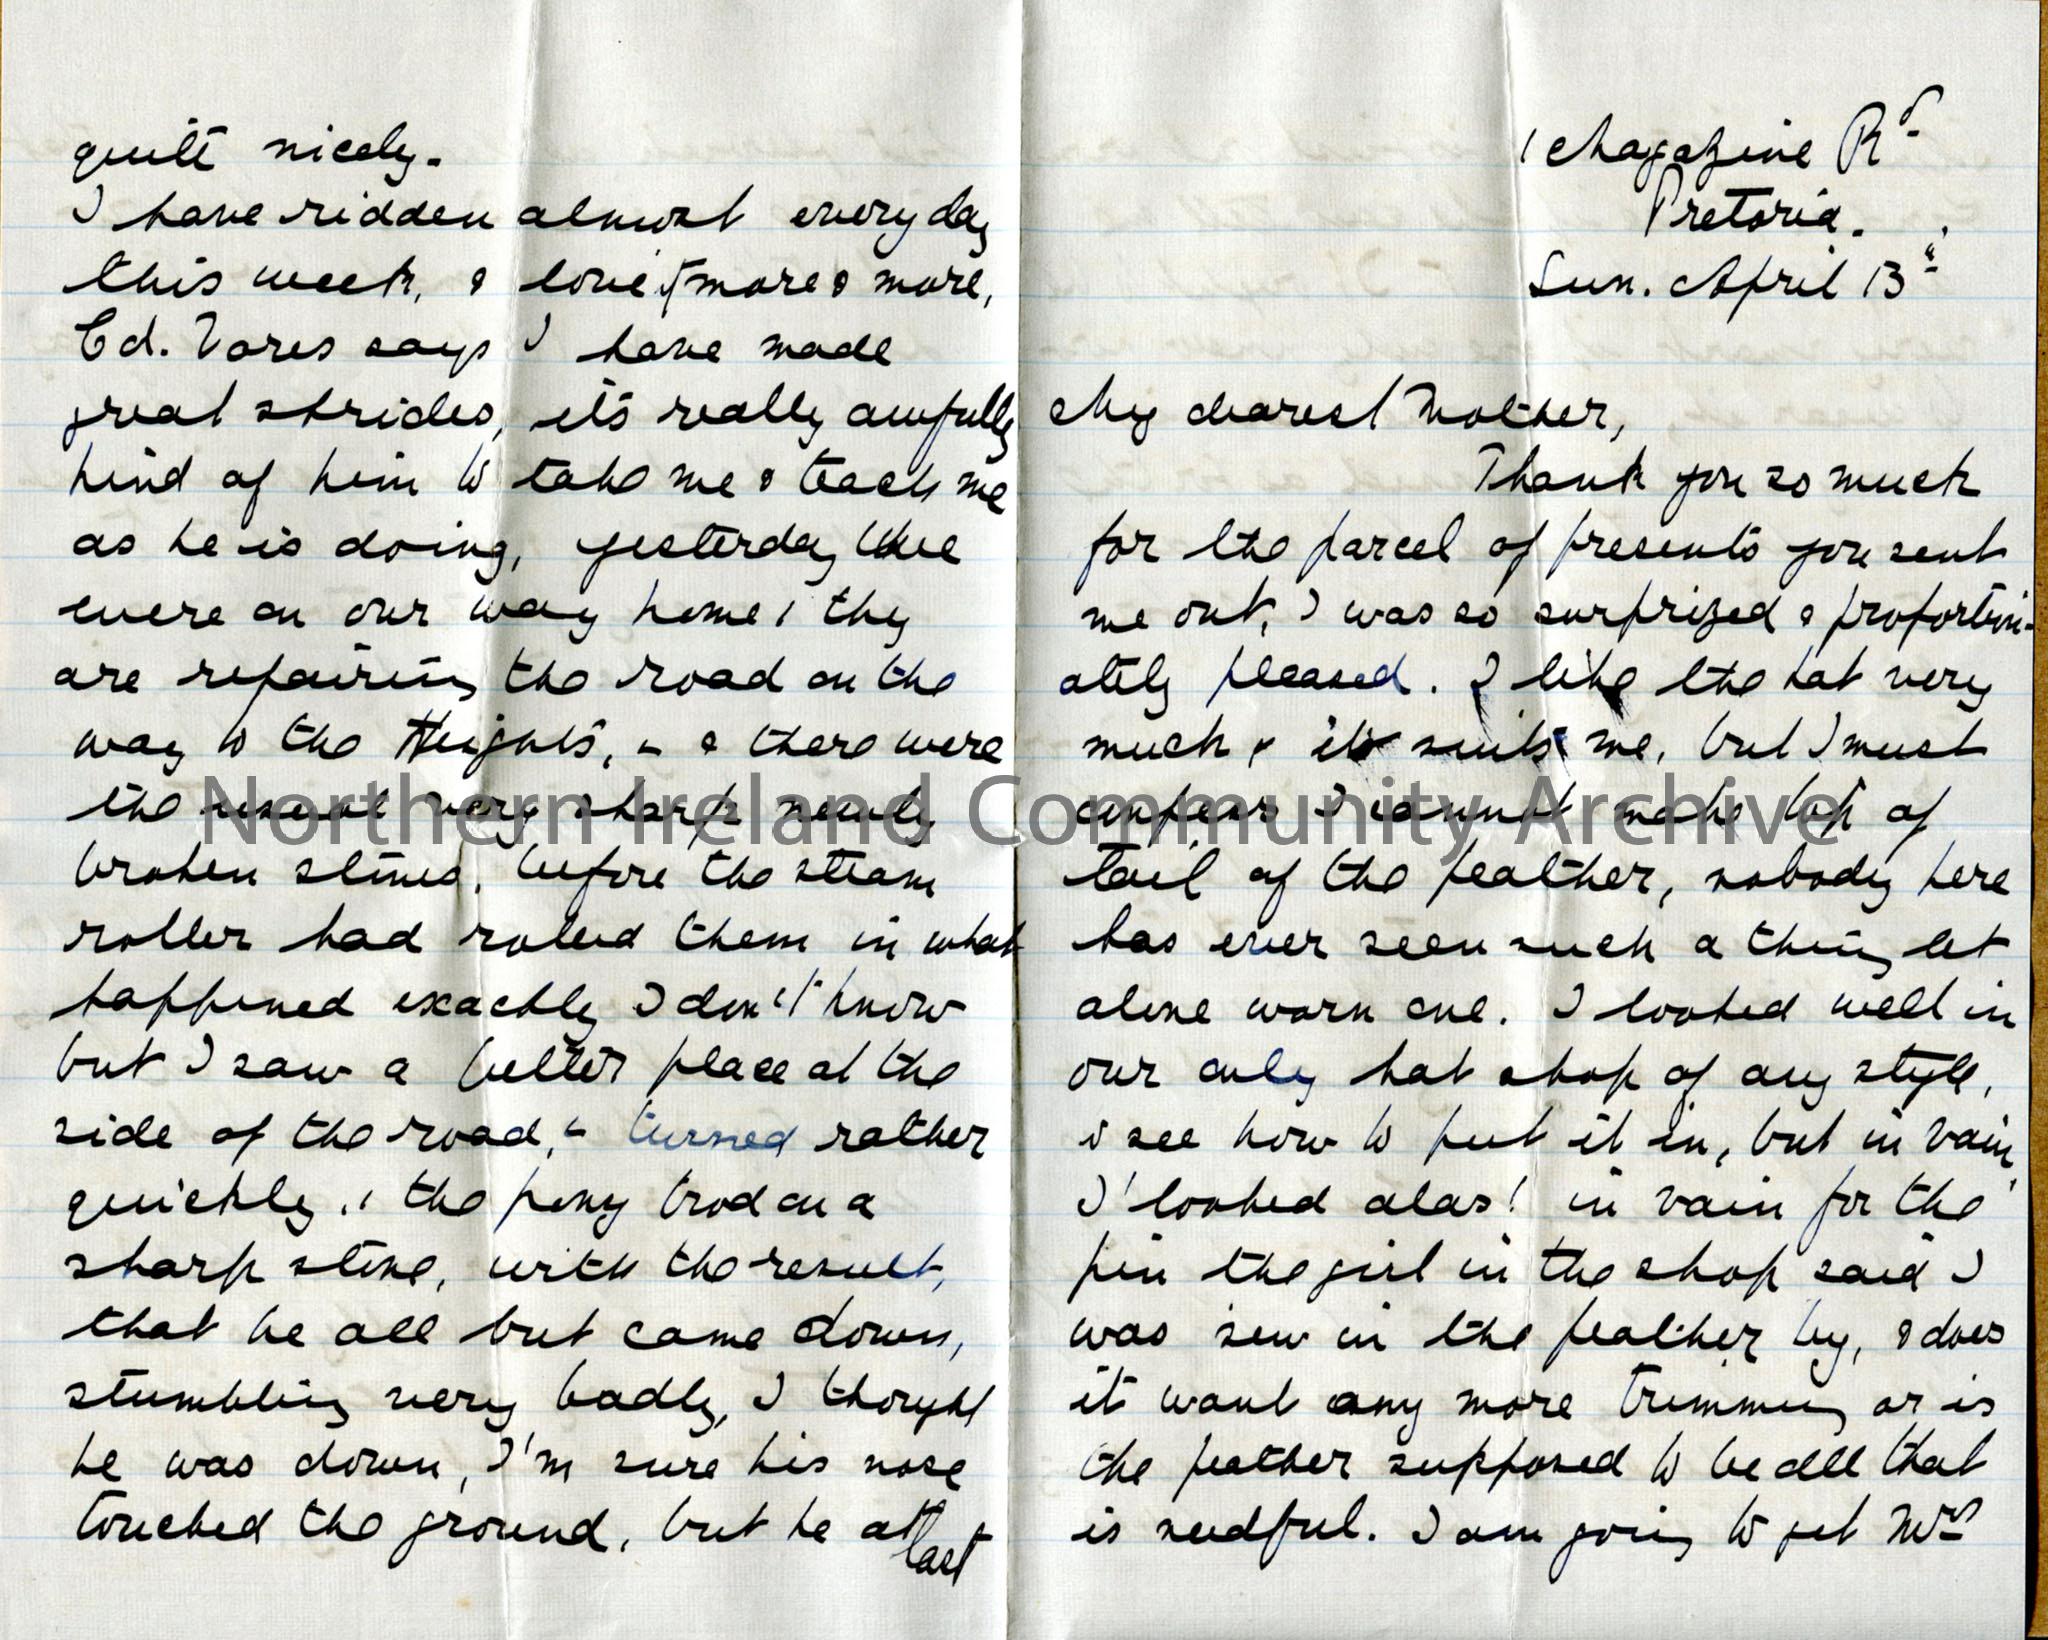 One of 3 double pages (1 white/lined, 2 blue/unlined) of handwritten letter from Dorothy to her mother. Her mother has sent a feather but she is unsur…